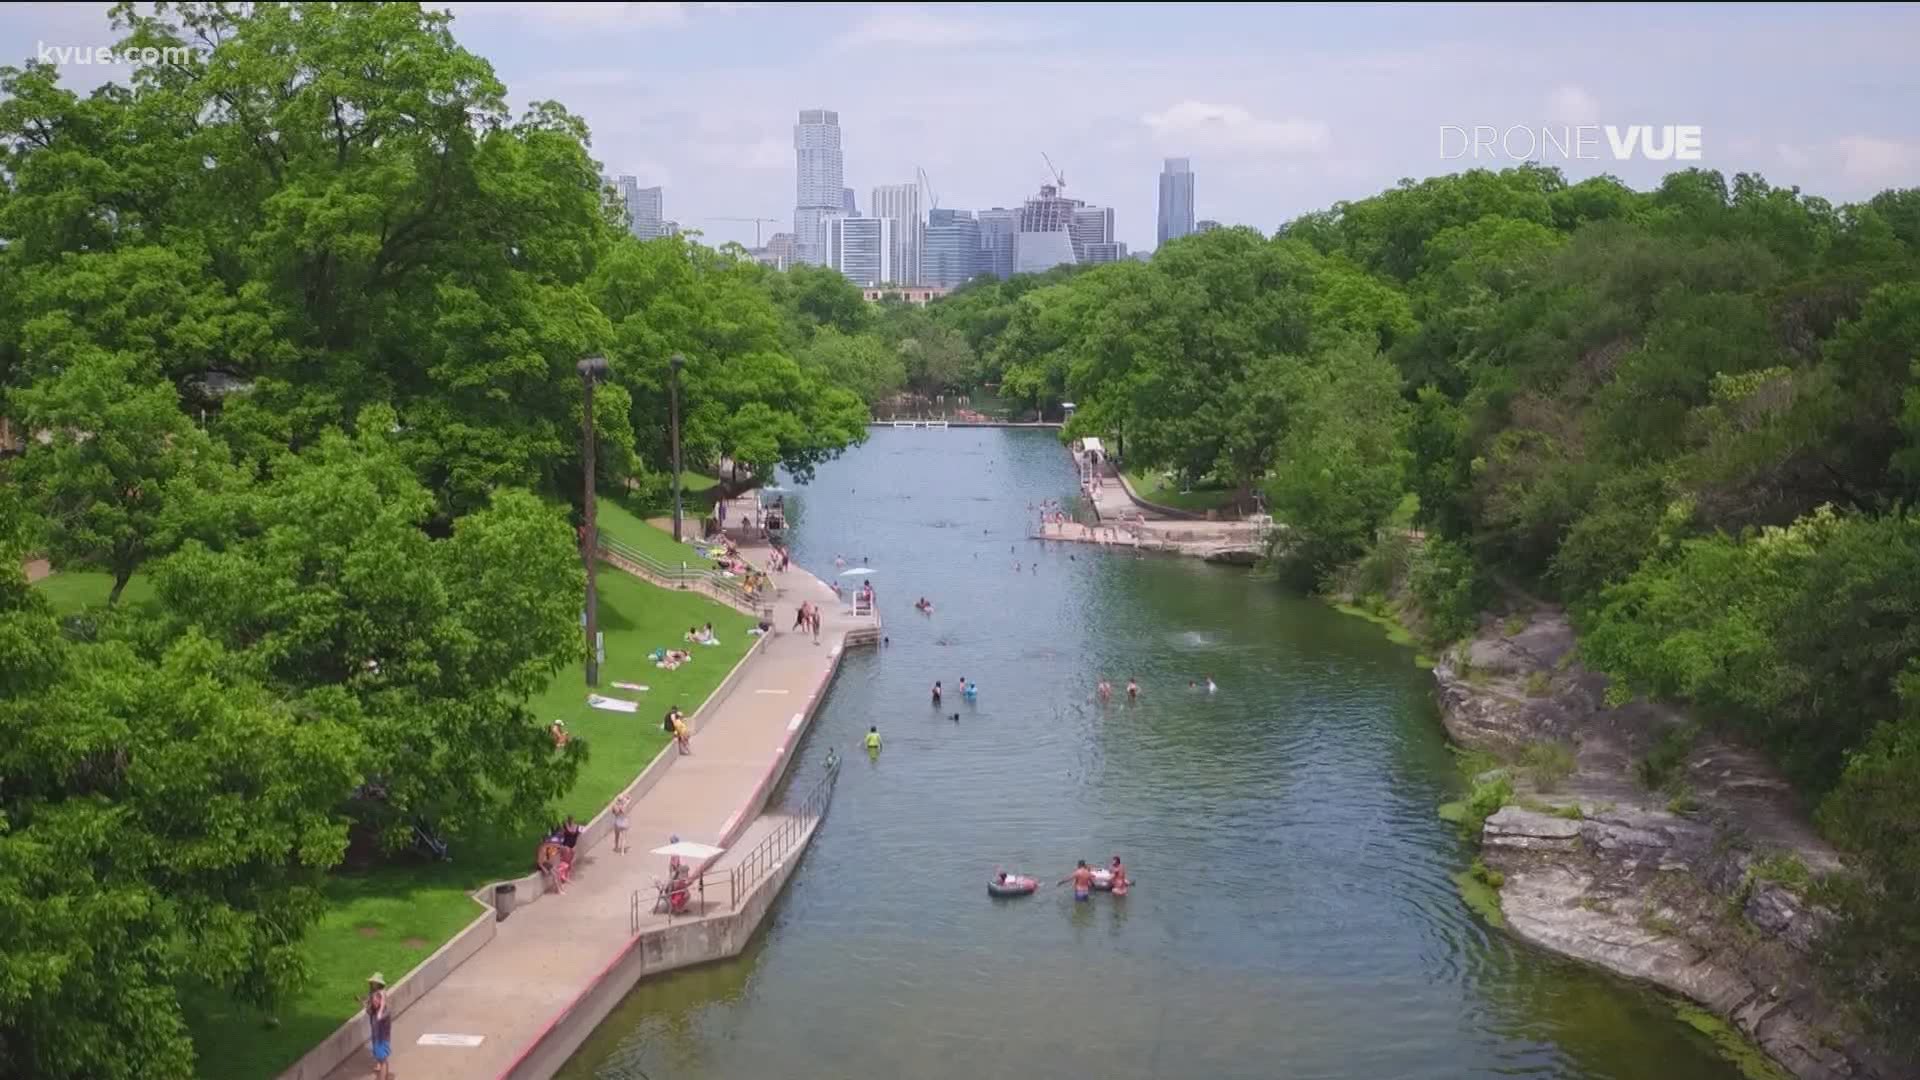 Barton Springs Pool will reopen on Friday. It has been closed due to flooding.